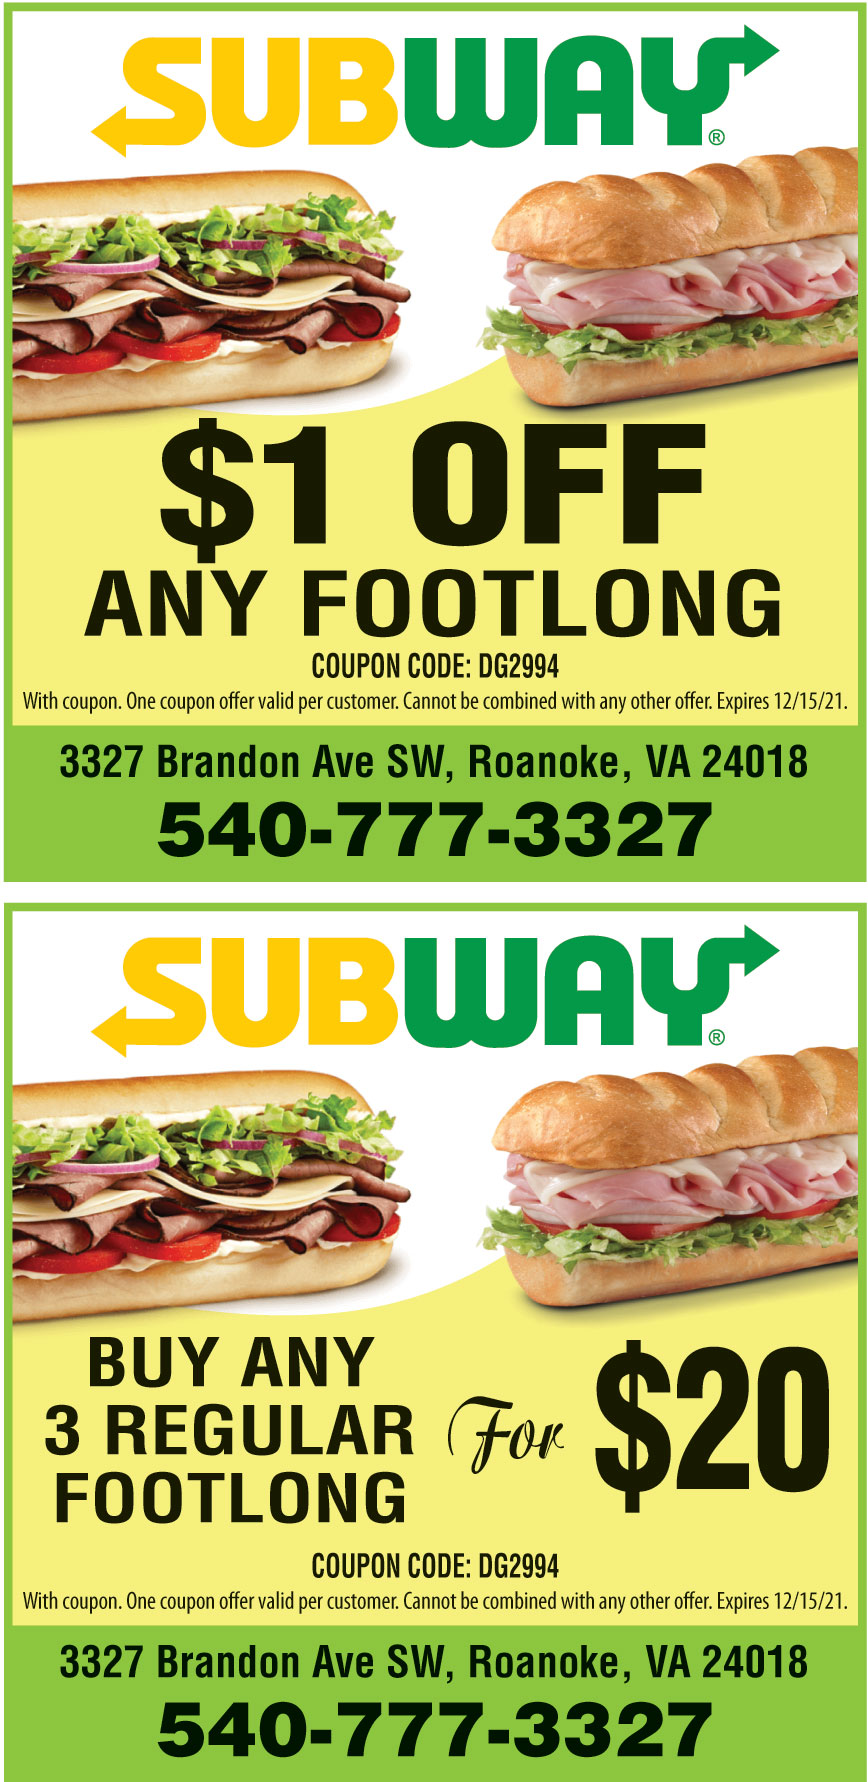 subway-3-footlongs-for-15-95-online-printable-coupons-usa-local-free-printable-shopping-coupons